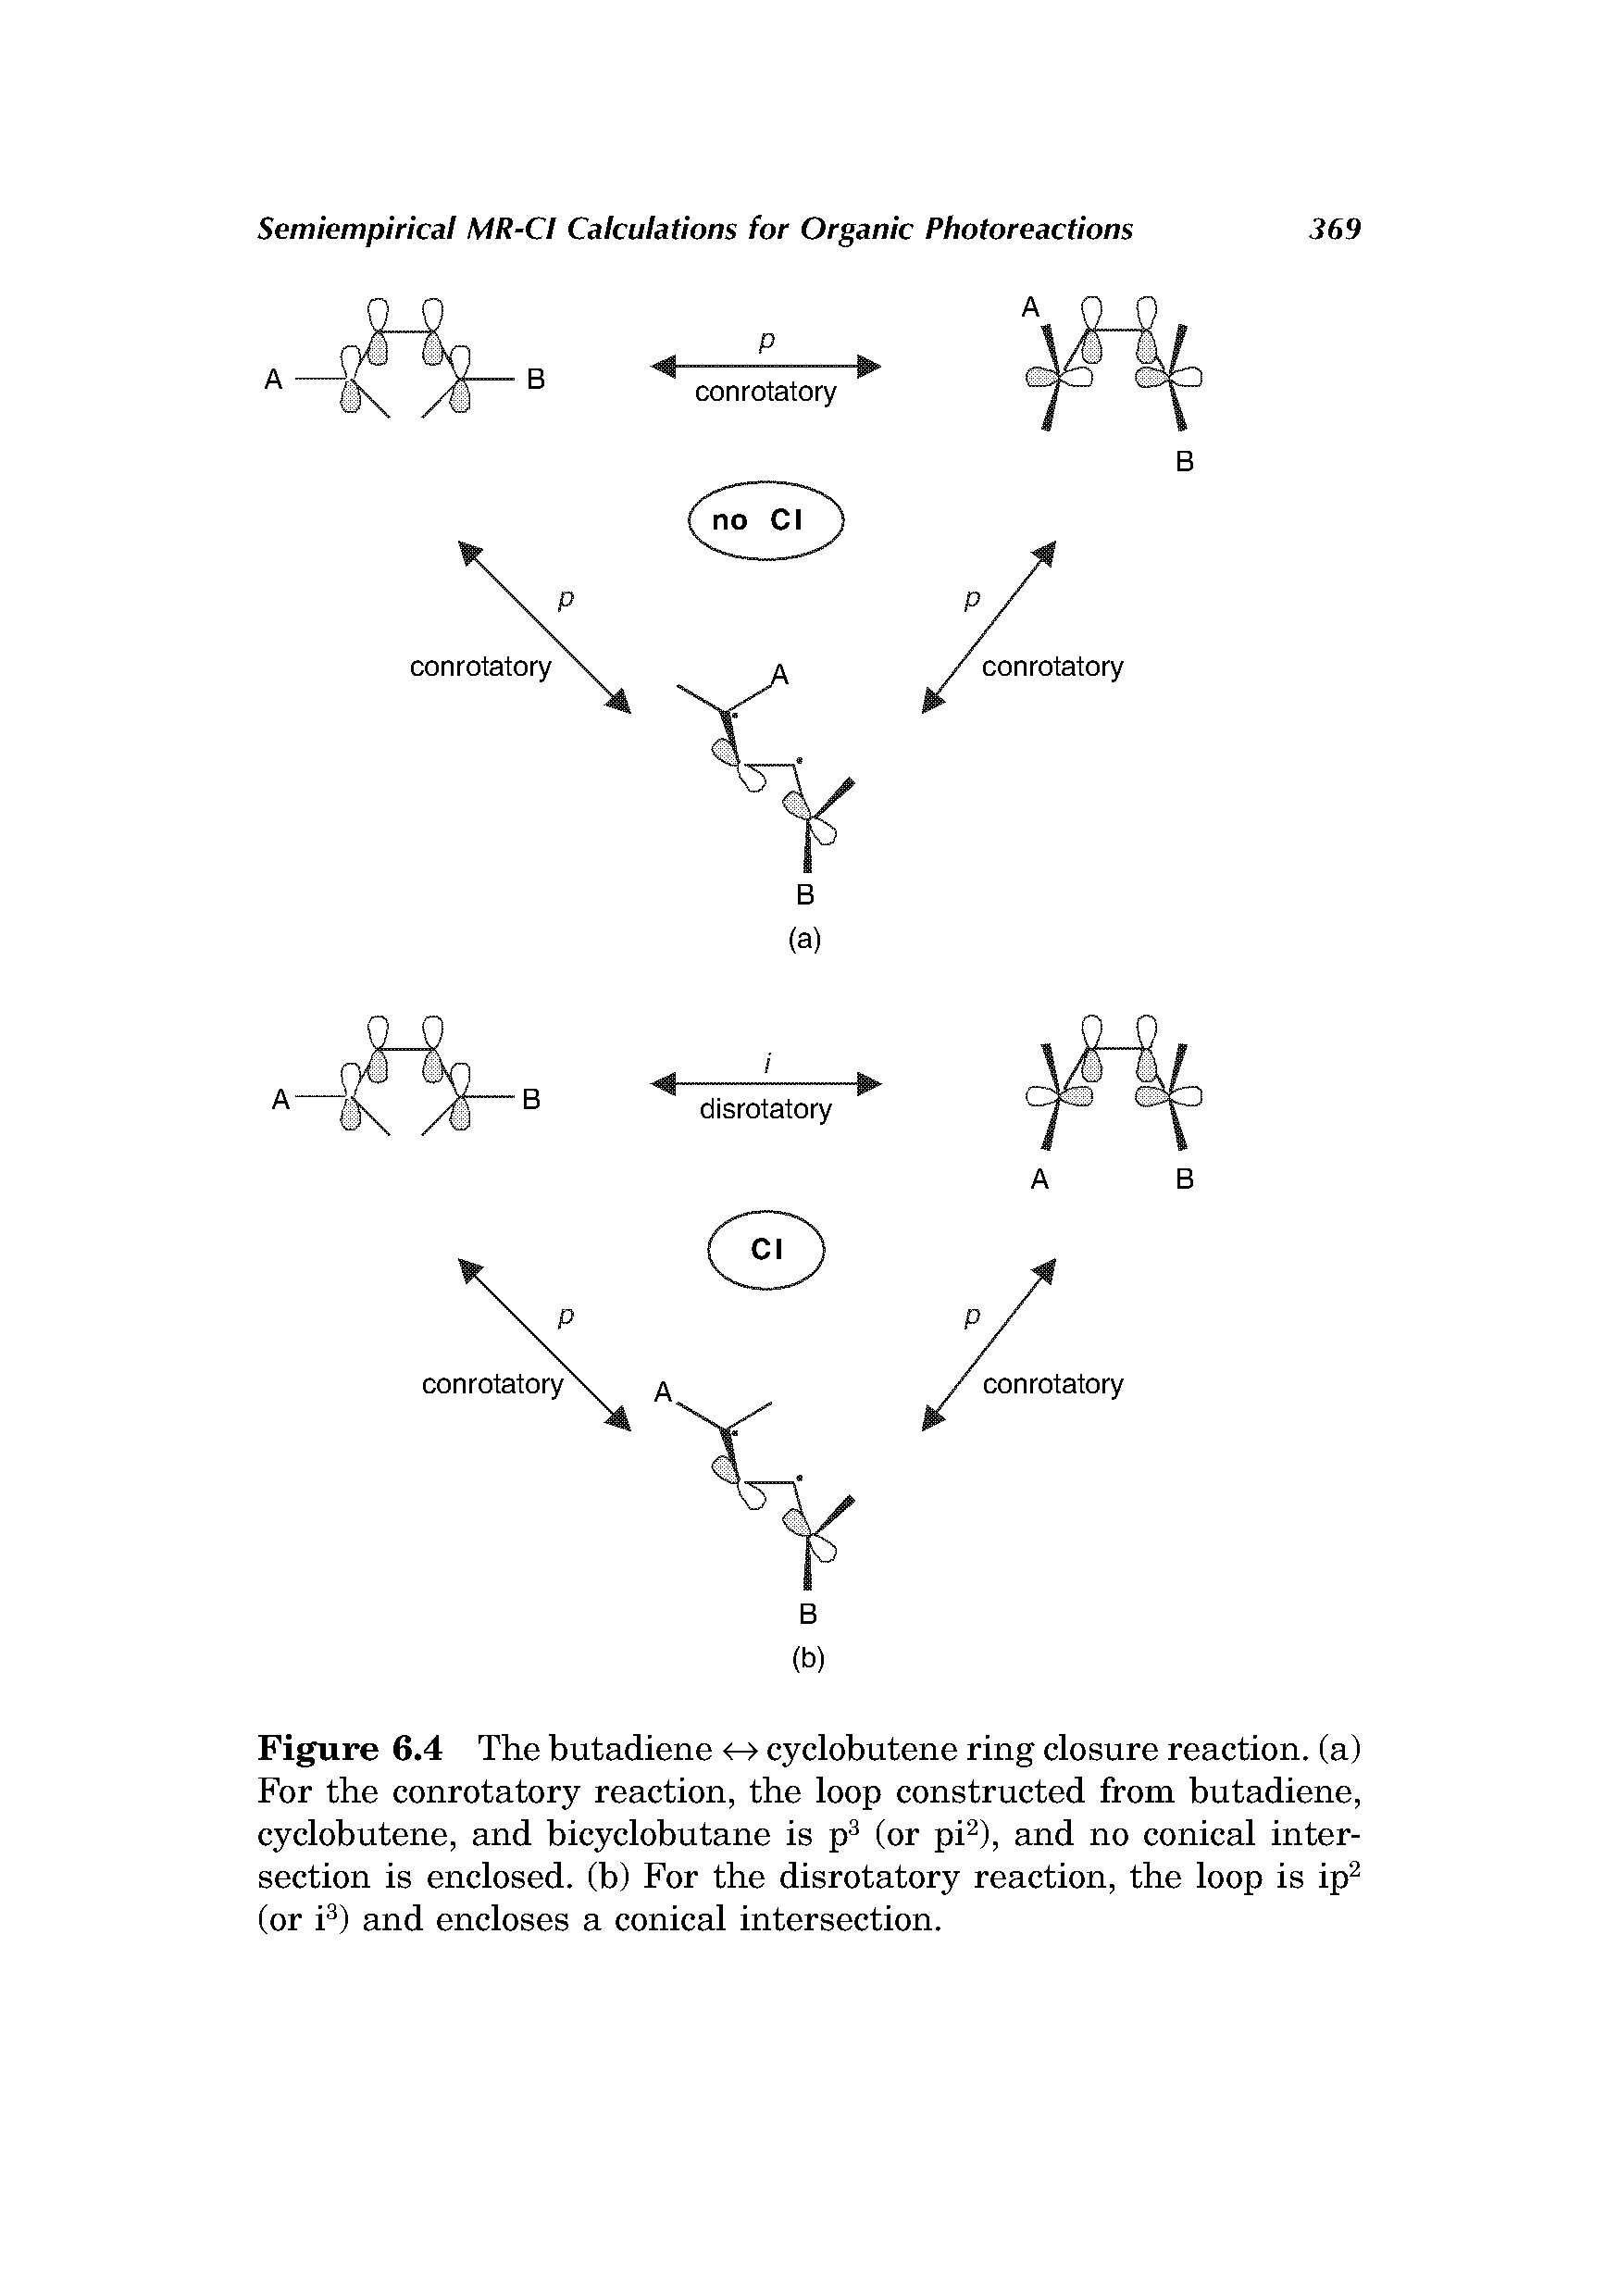 Figure 6.4 The butadiene cyclobutene ring closure reaction, (a) For the conrotatory reaction, the loop constructed from butadiene, cyclobutene, and bicyclobutane is p (or pi ), and no conical intersection is enclosed, (b) For the disrotatory reaction, the loop is ip (or i ) and encloses a conical intersection.